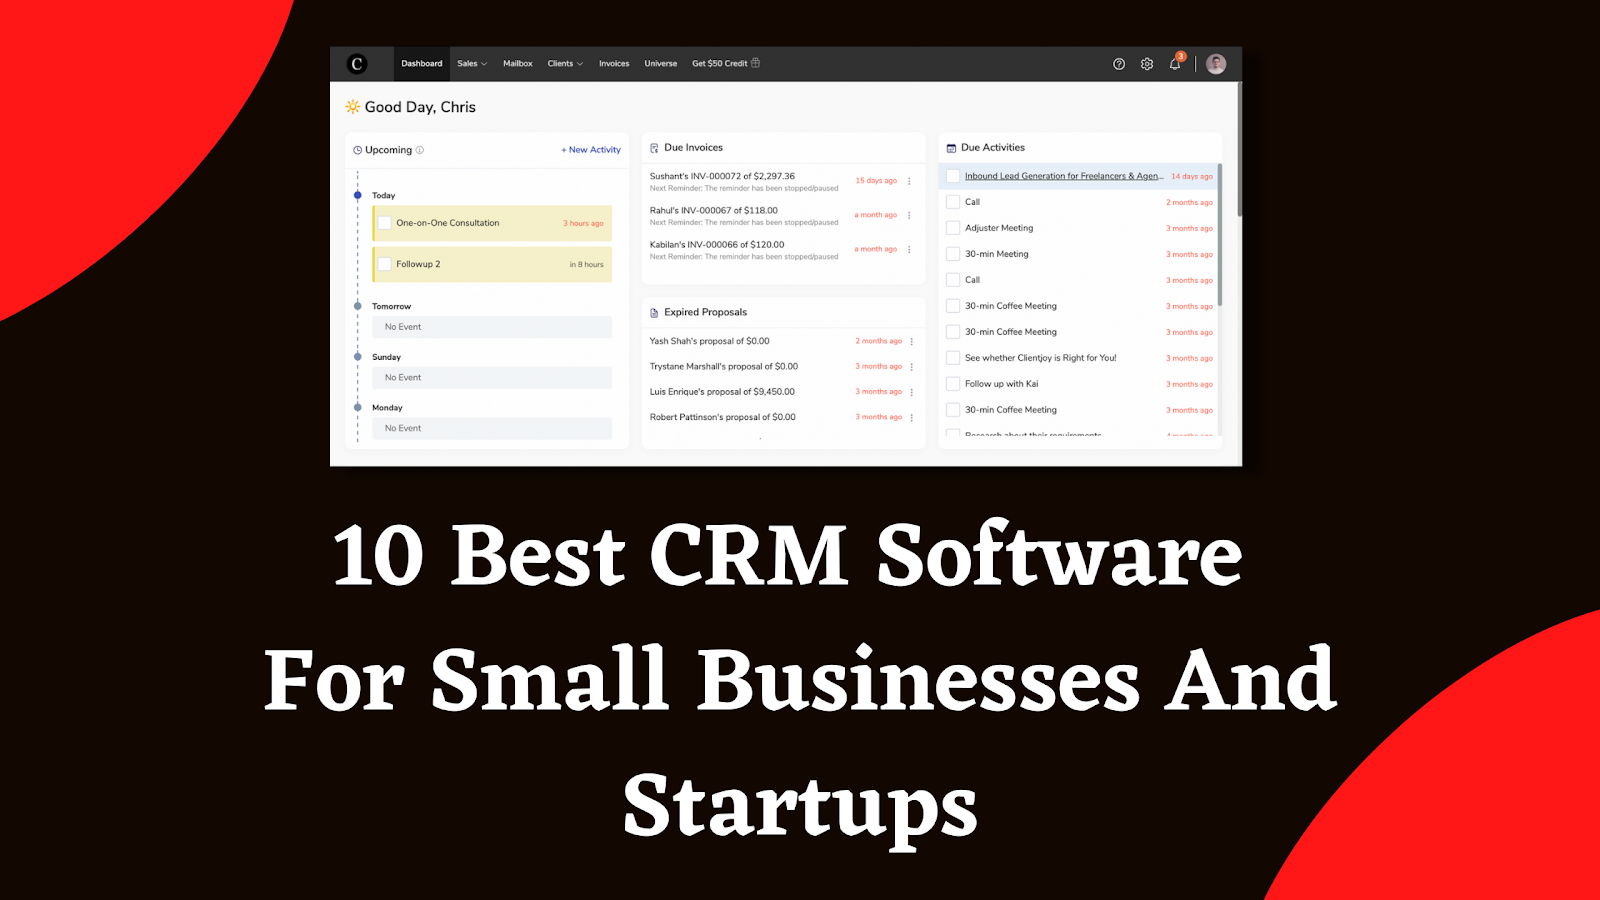 Best CRM Software For Small Businesses And Startups